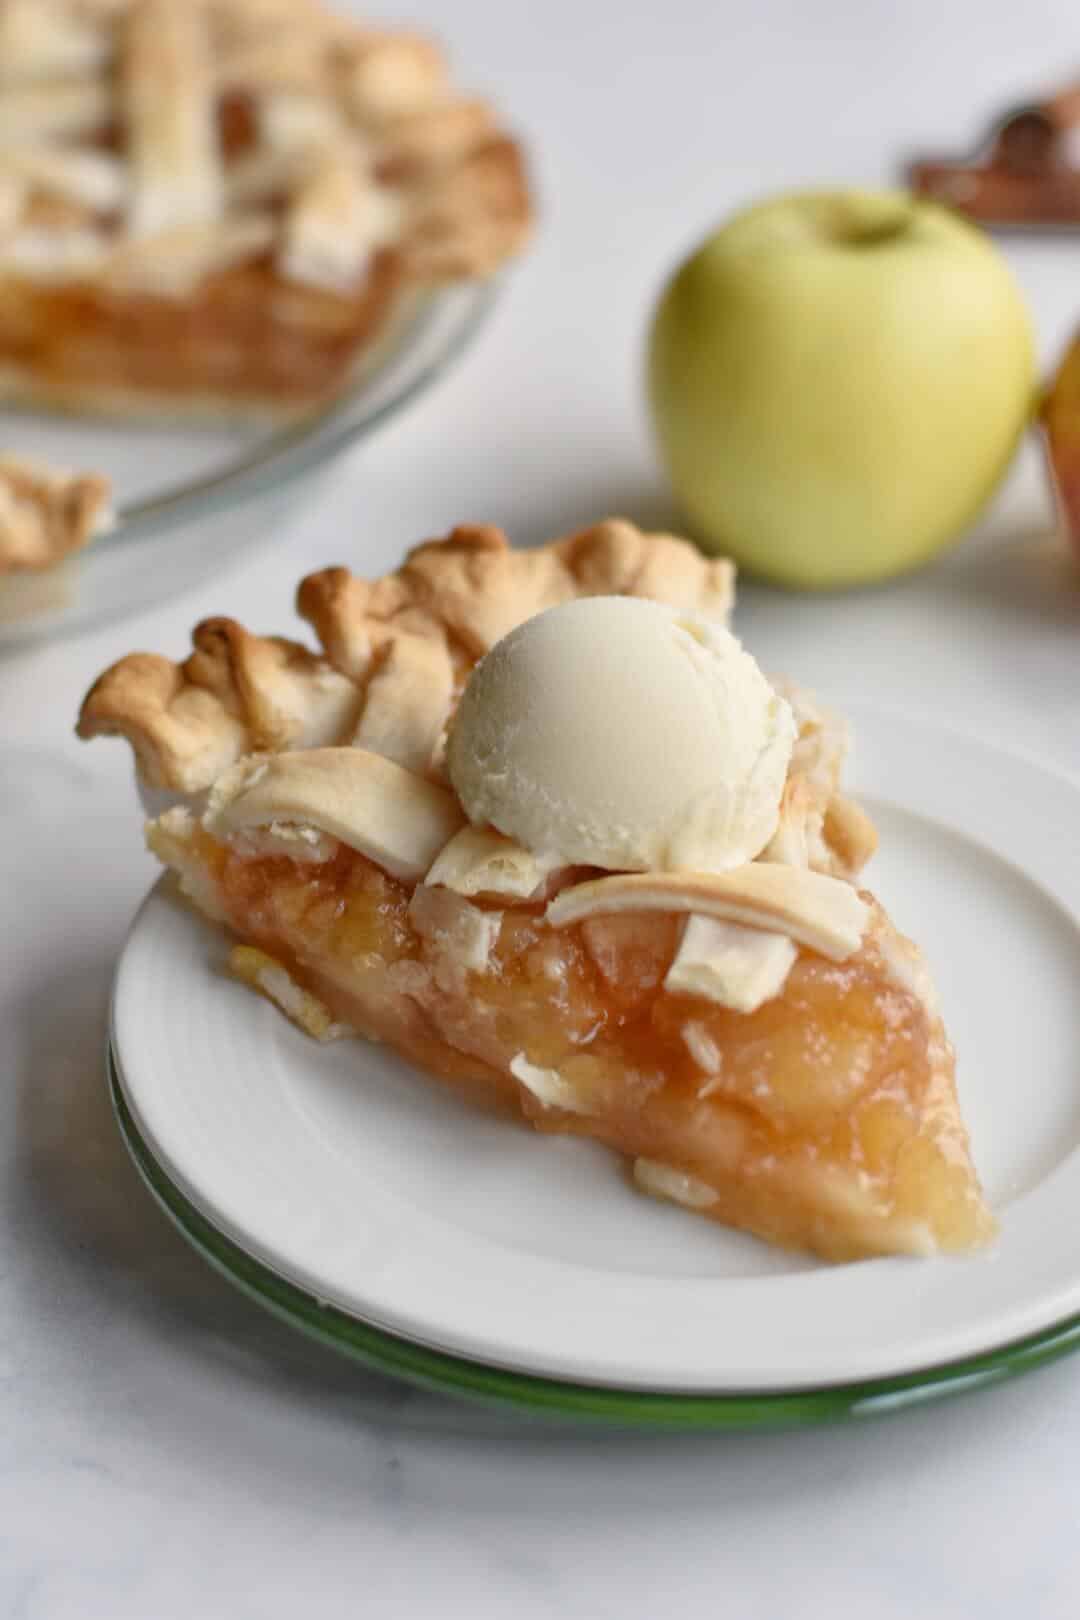 Homemade apple pie on a plate with ice cream.